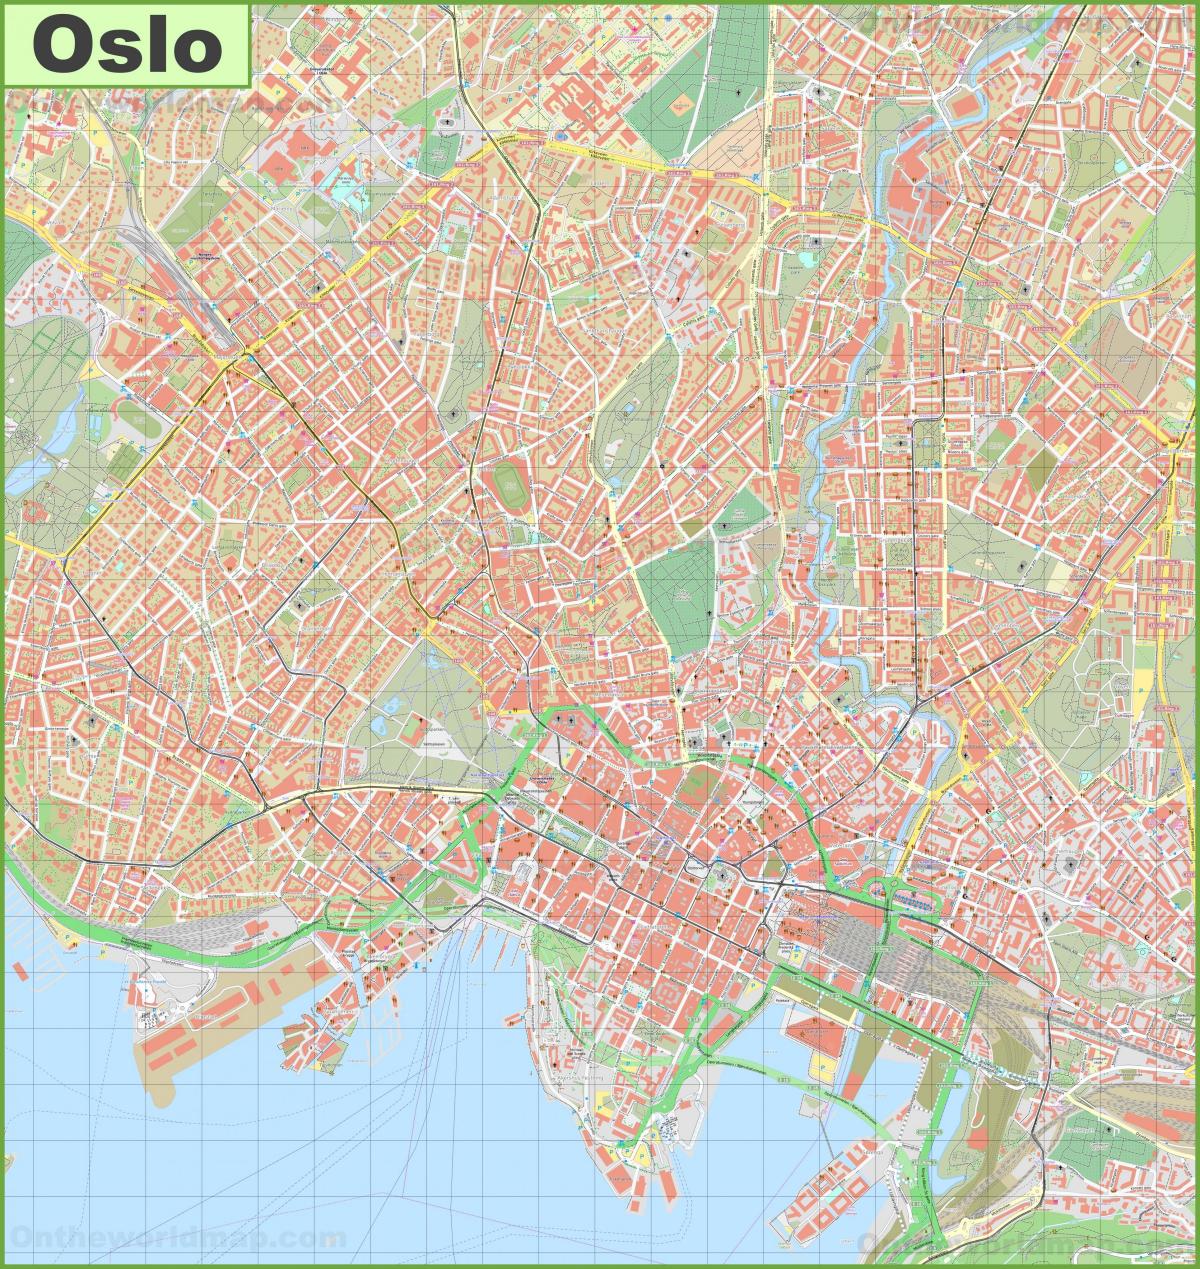 Oslo streets map